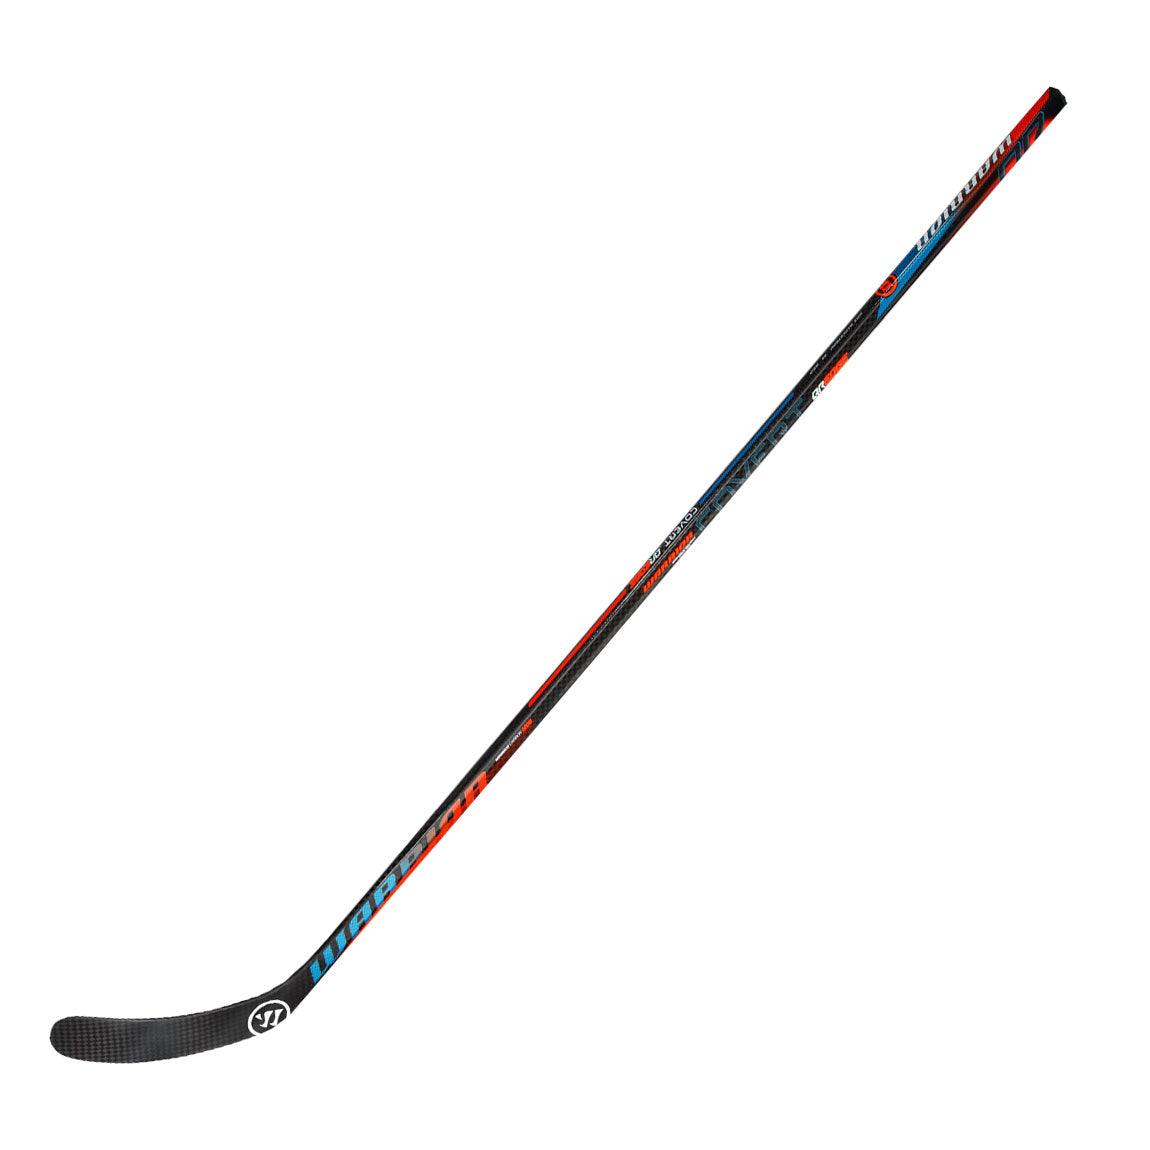 Covert QRE Hockey Stick - Junior - Sports Excellence